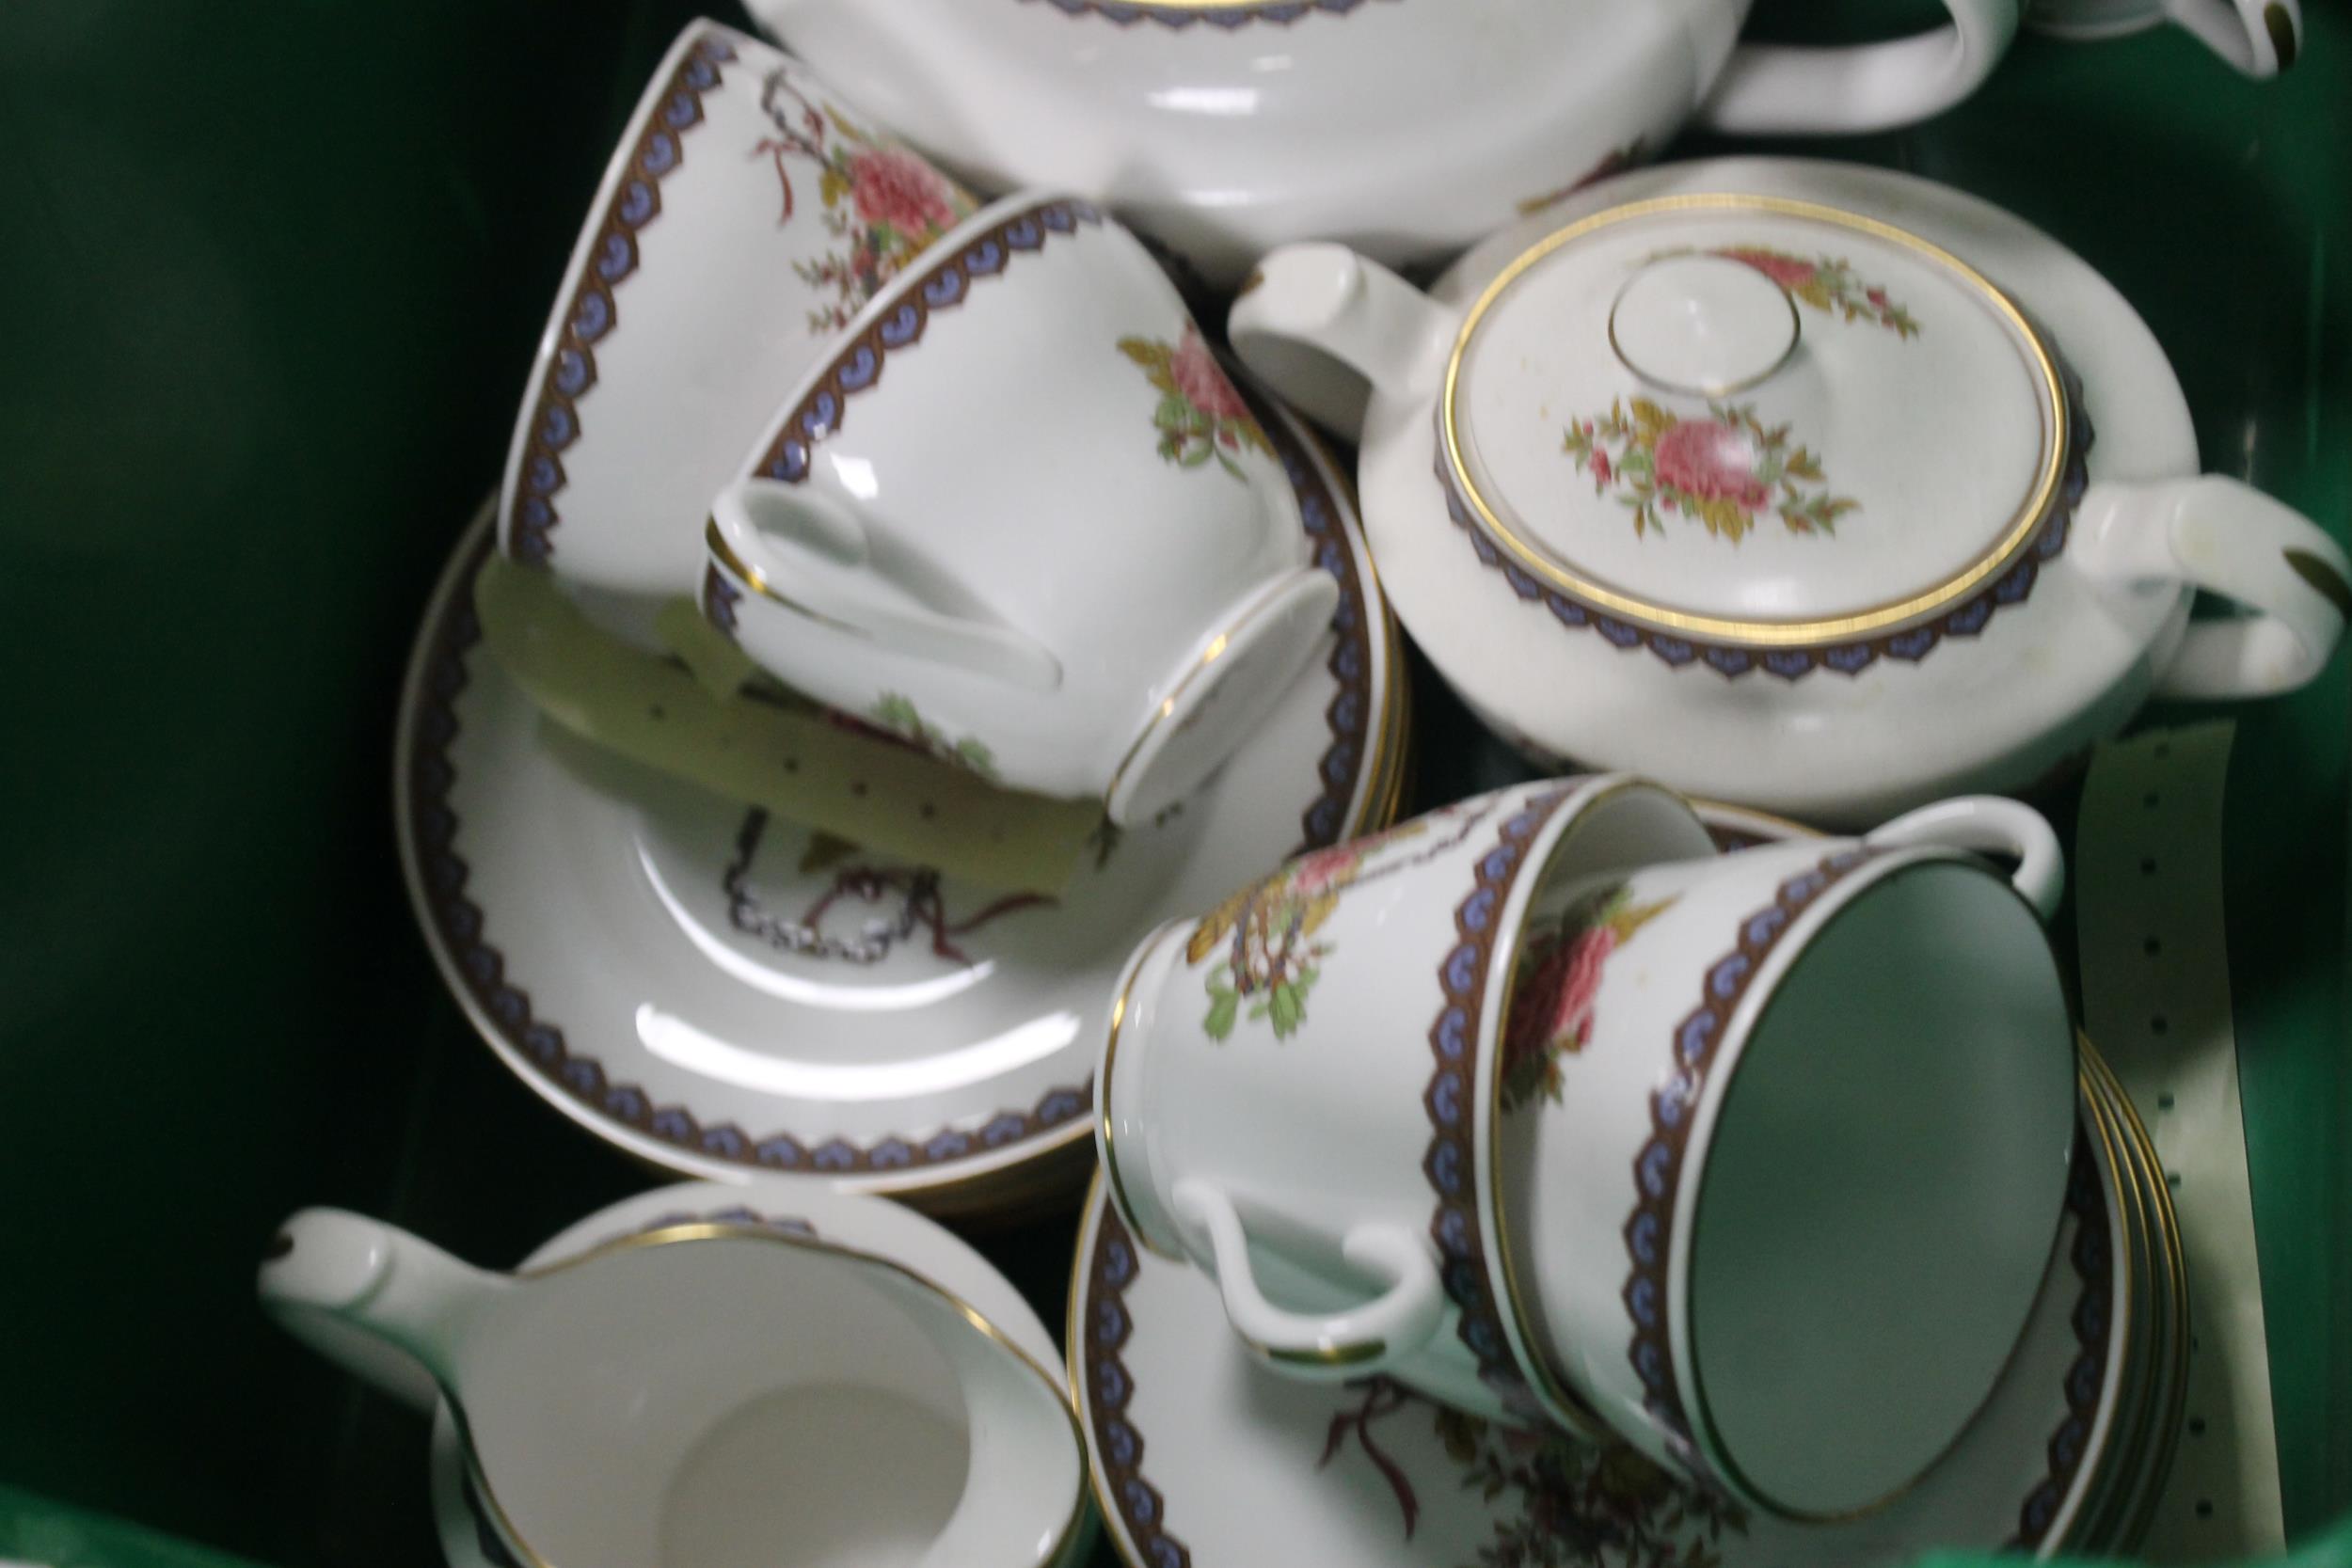 A SPODE TEASET IN "CHINESE BASKET" PATTERN INCLUDING TEAPOT - Image 3 of 3